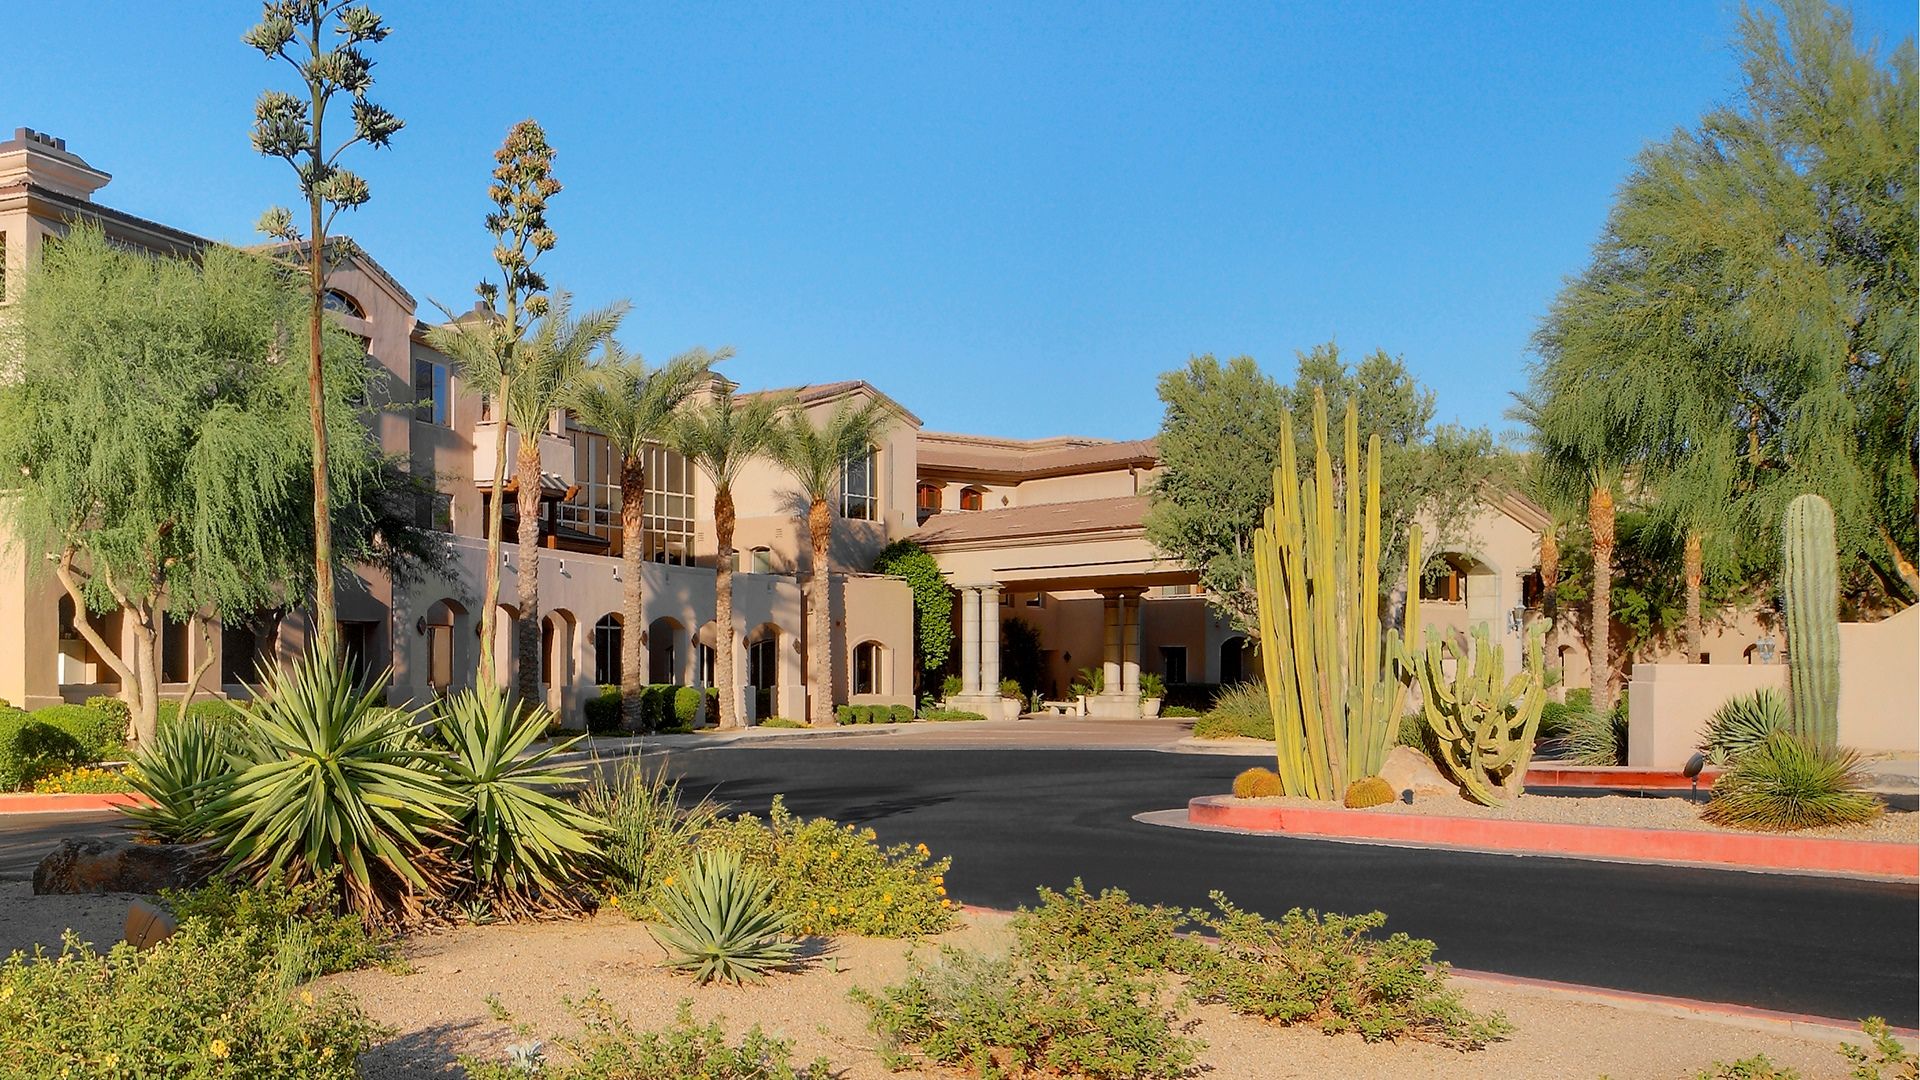 Atria Sierra Pointe exterior surrounded by cacti and trees